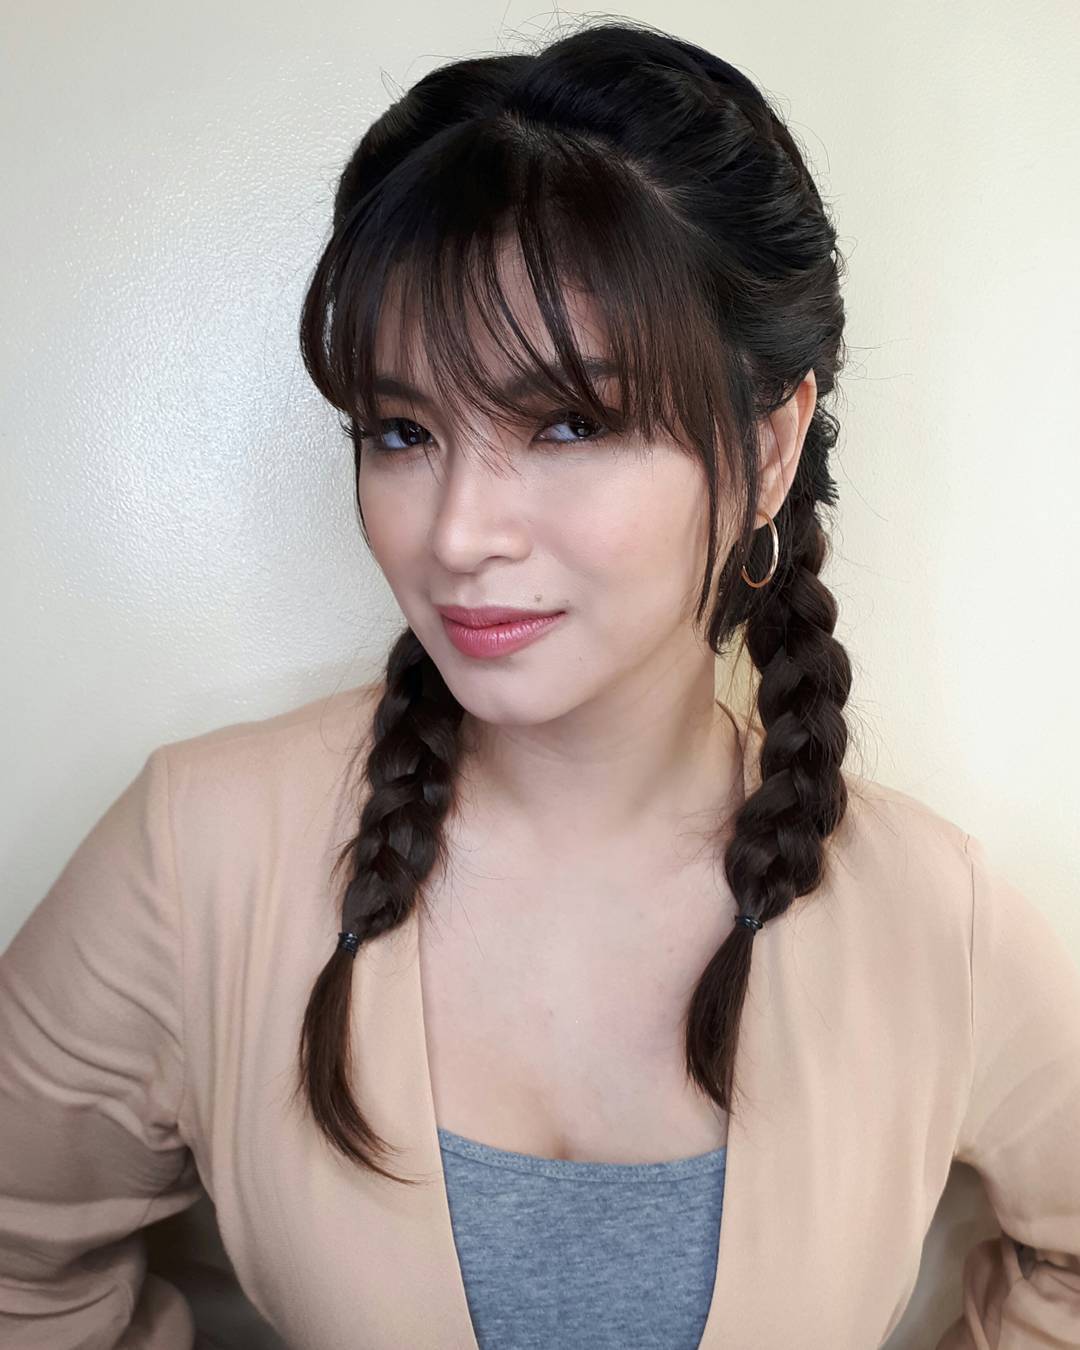 Angel Locsin Pussy - 37 times Angel Locsin made the internet swoon with her best looks! |  ABS-CBN Entertainment